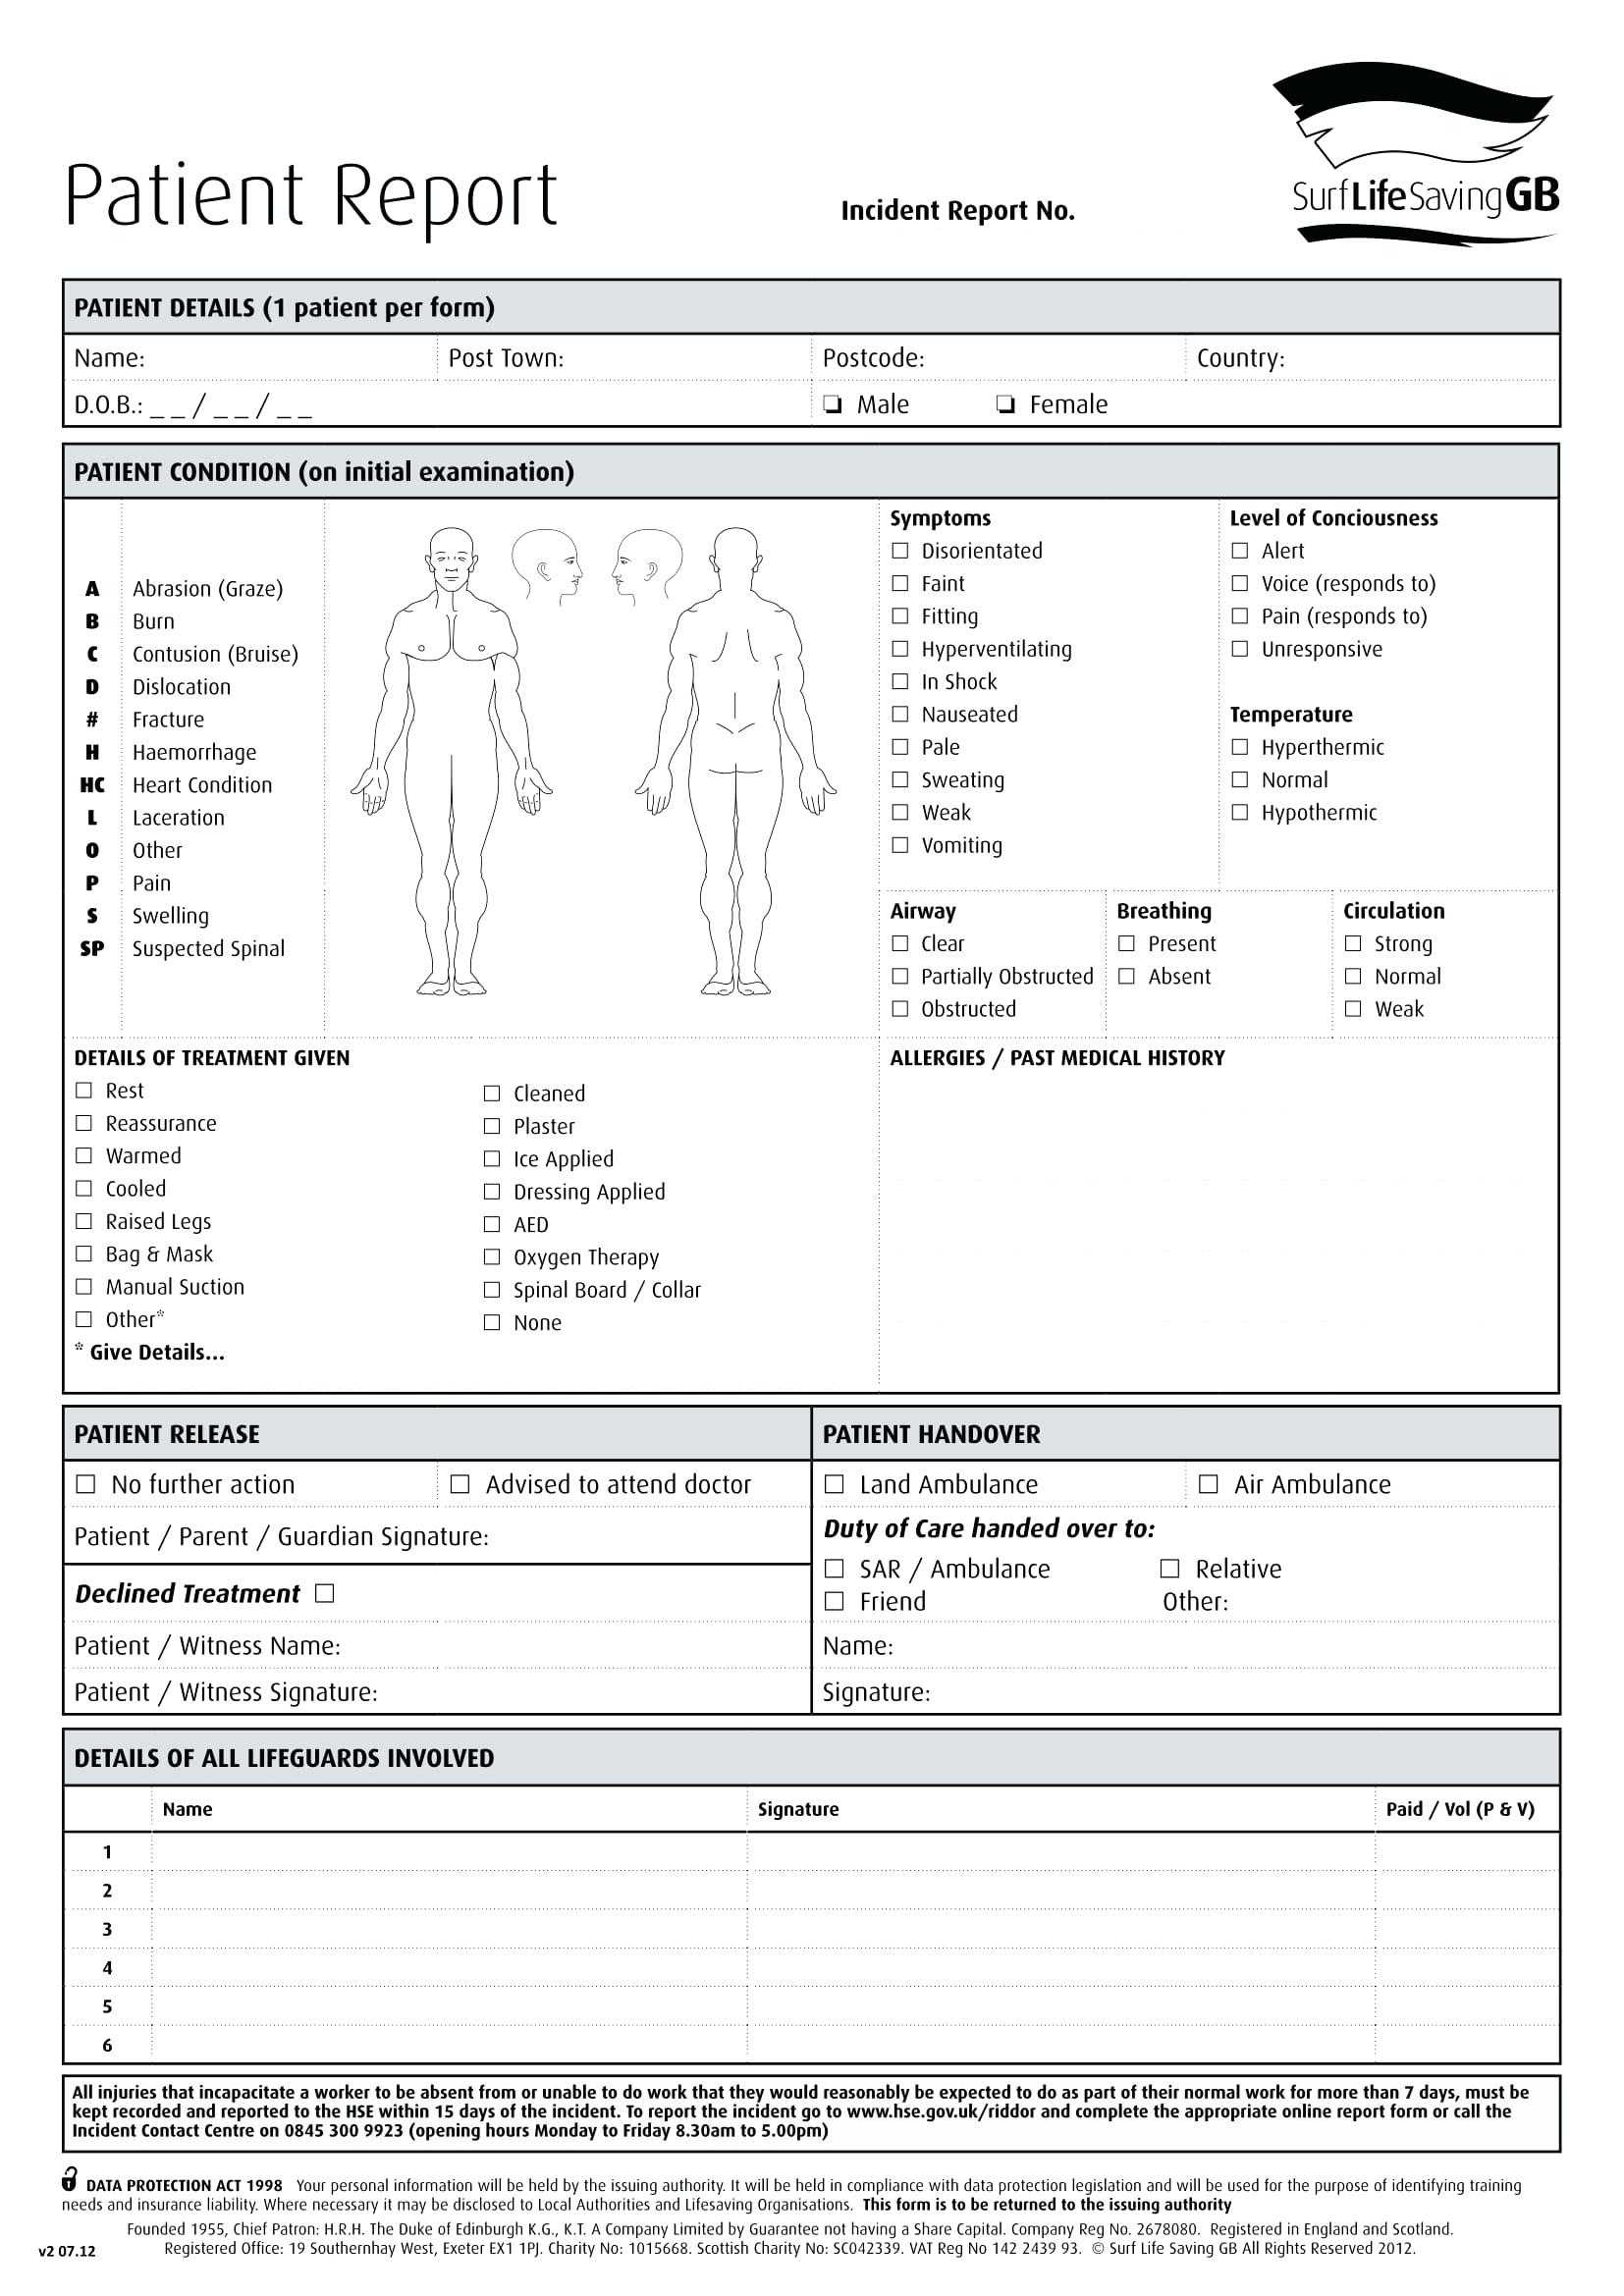 Incident Report Form Template Free Download – Vmarques For Patient Report Form Template Download